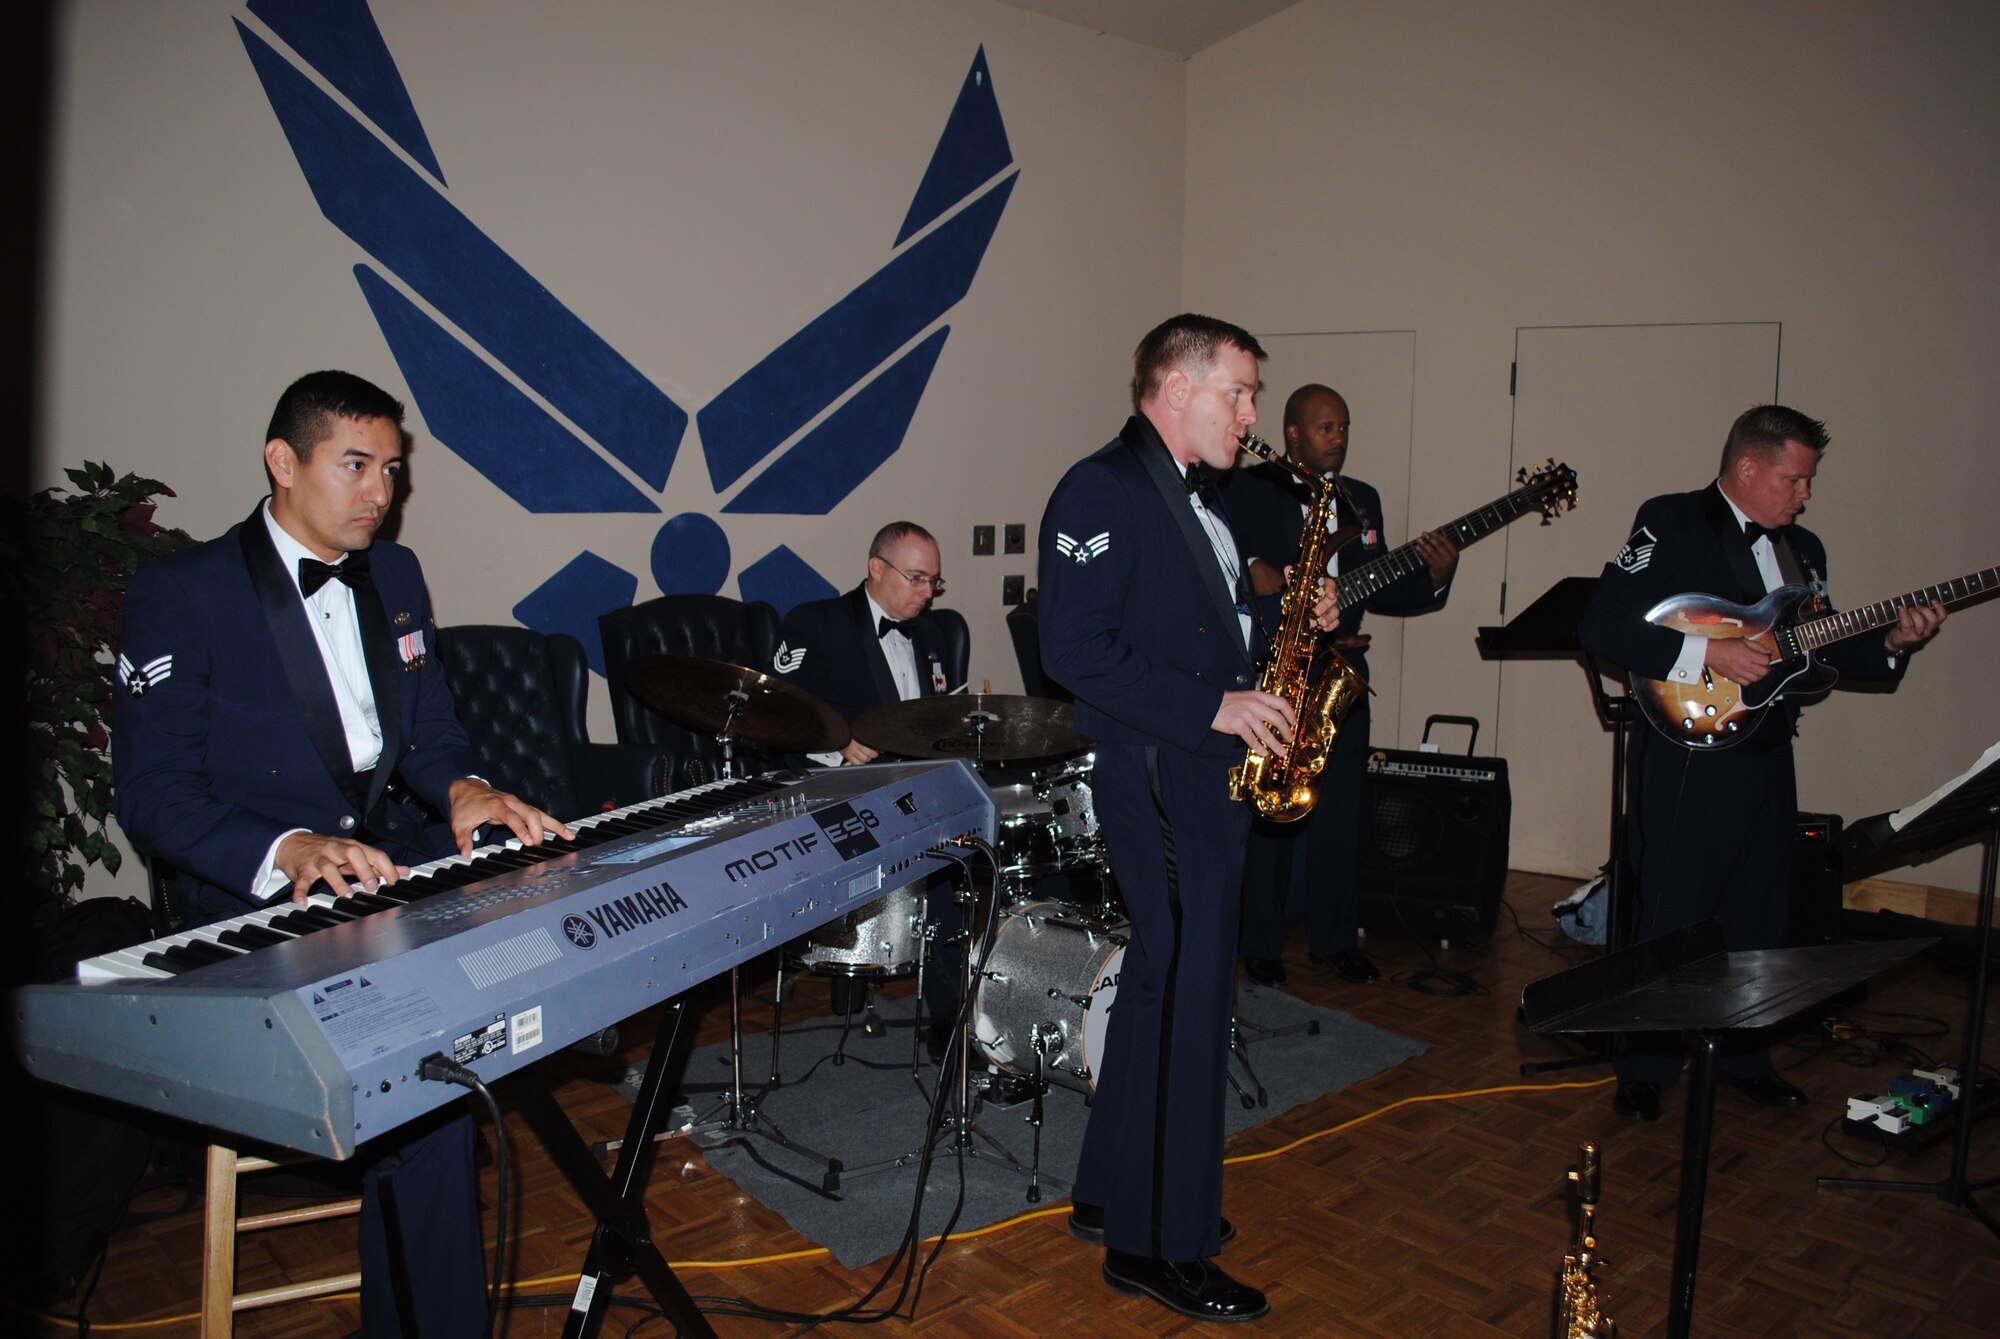 The Warhawk  Band performs another jazz hit during the 433rd Airlift Wing 60th Anniversary Dinner, held Sept. 10, 2010, at the Gateway Club Ballroom at Lackland Air Force Base, Texas. (U.S. Air Force photo/Senior Airman Luis Loza Gutierrez)